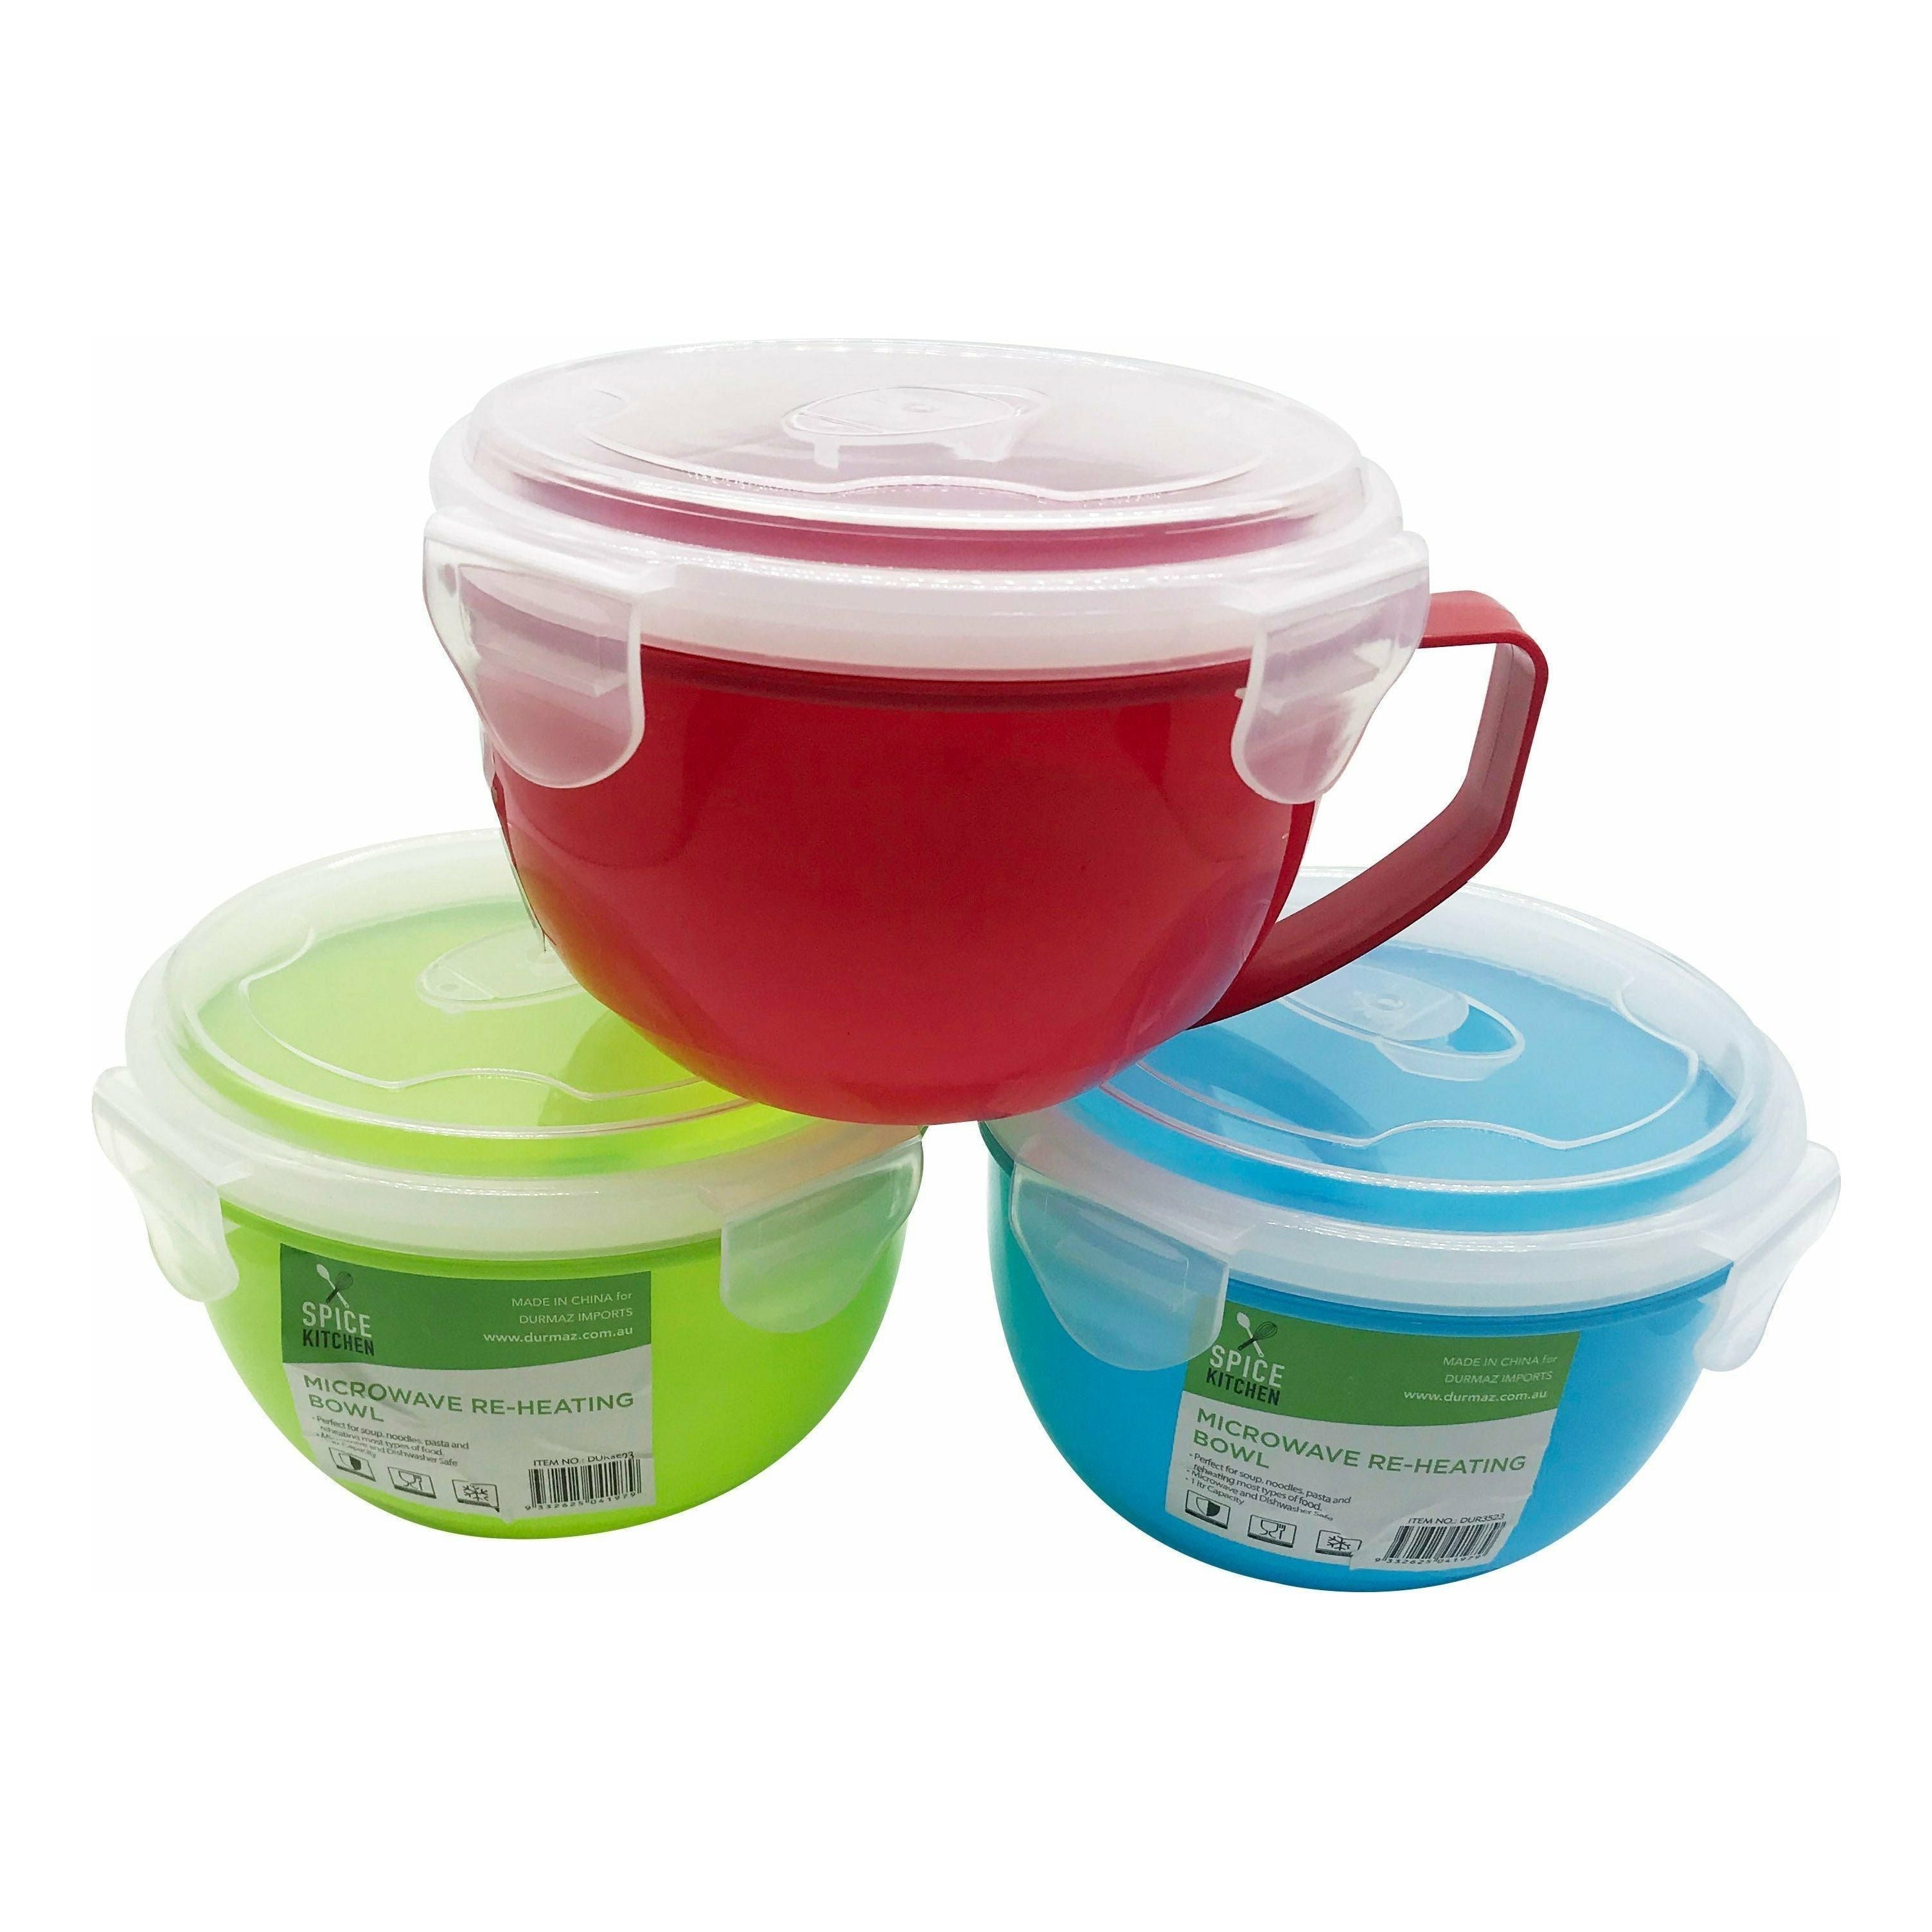 Microwave Reheating Bowl - 1 Litre 1 Piece Assorted - Dollars and Sense